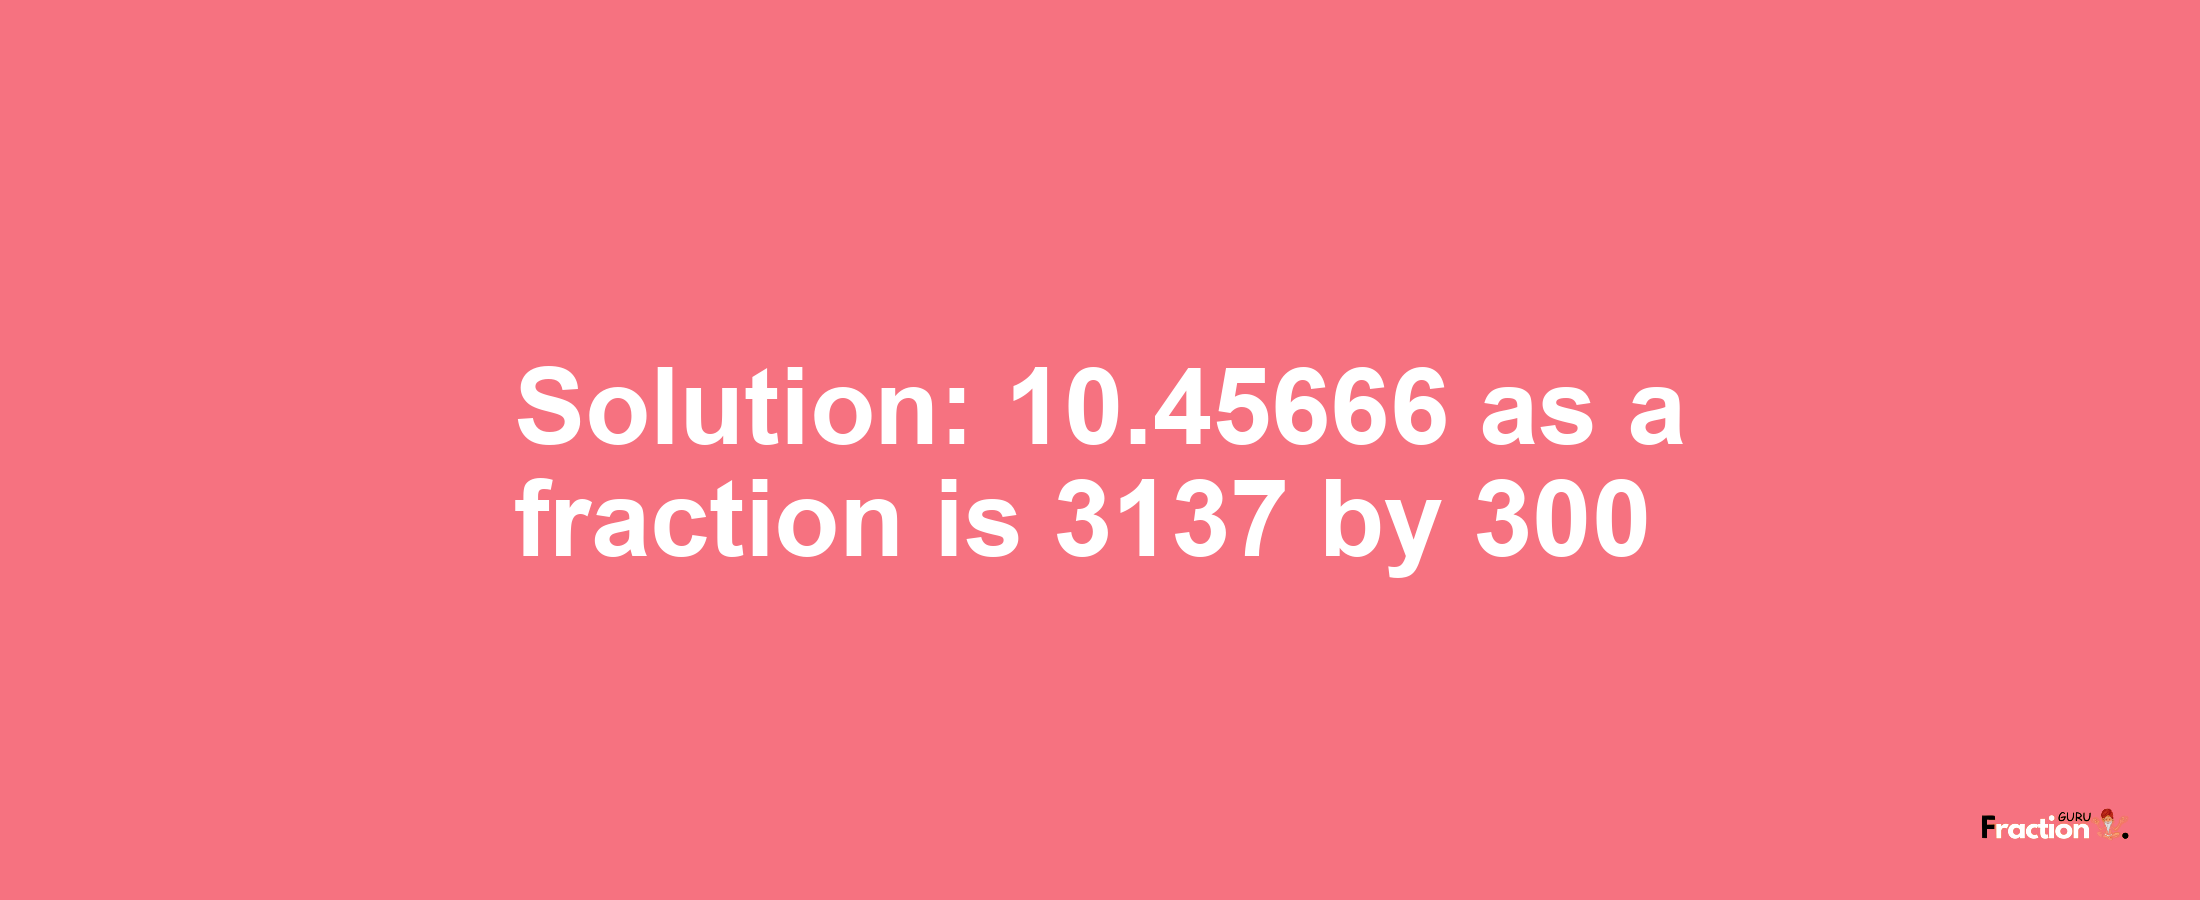 Solution:10.45666 as a fraction is 3137/300